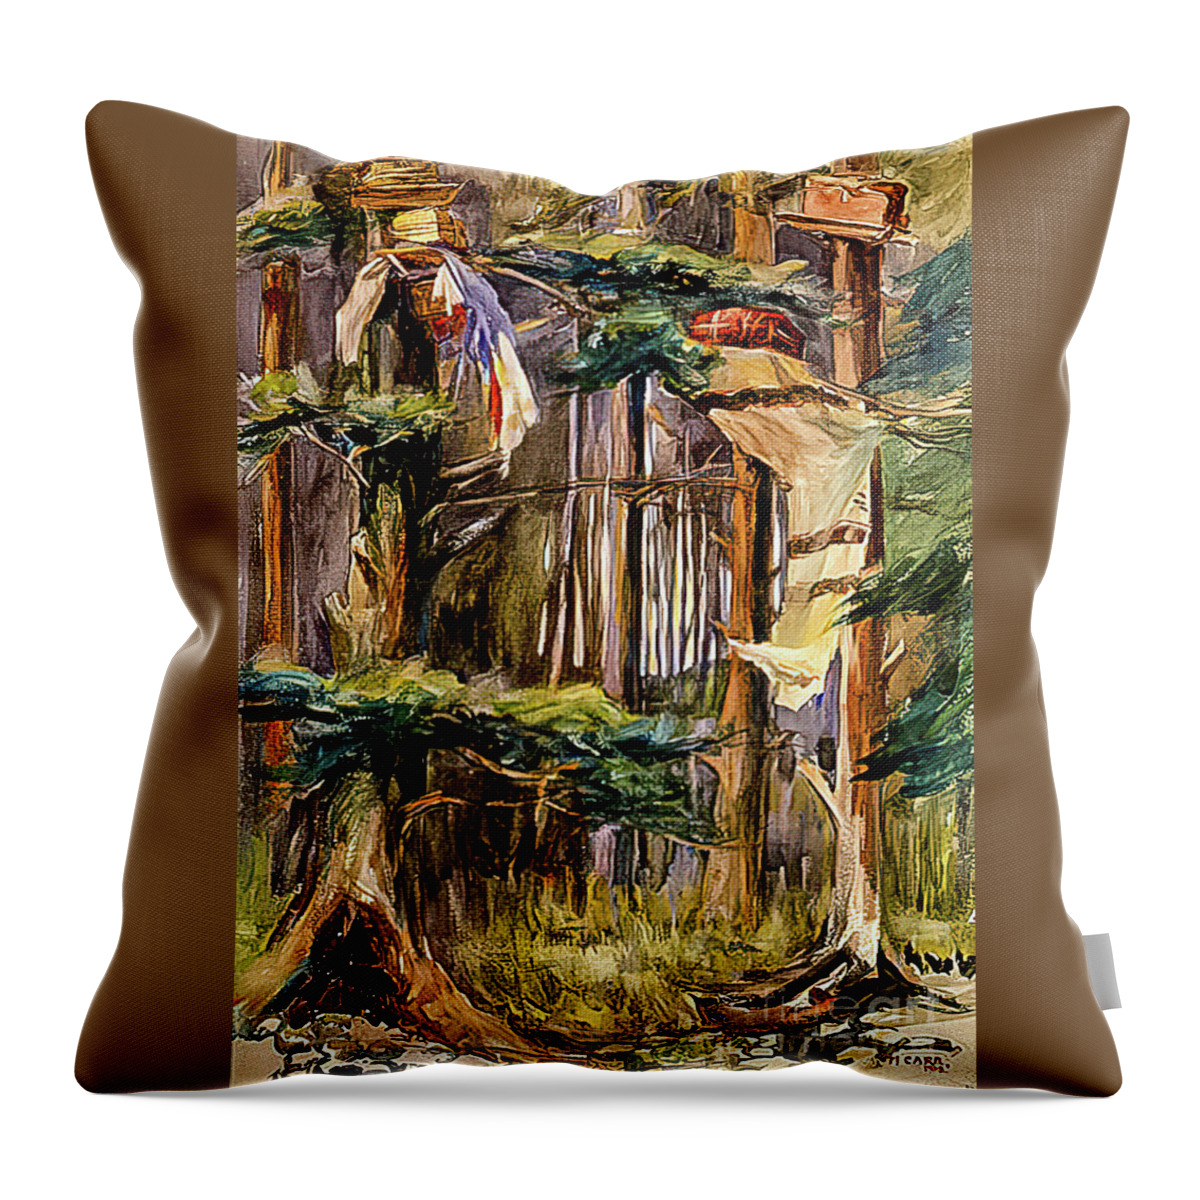 Alert Bay Throw Pillow featuring the painting Alert Bay Mortuary Boxes by Emily Carr 1908 by Emily Carr